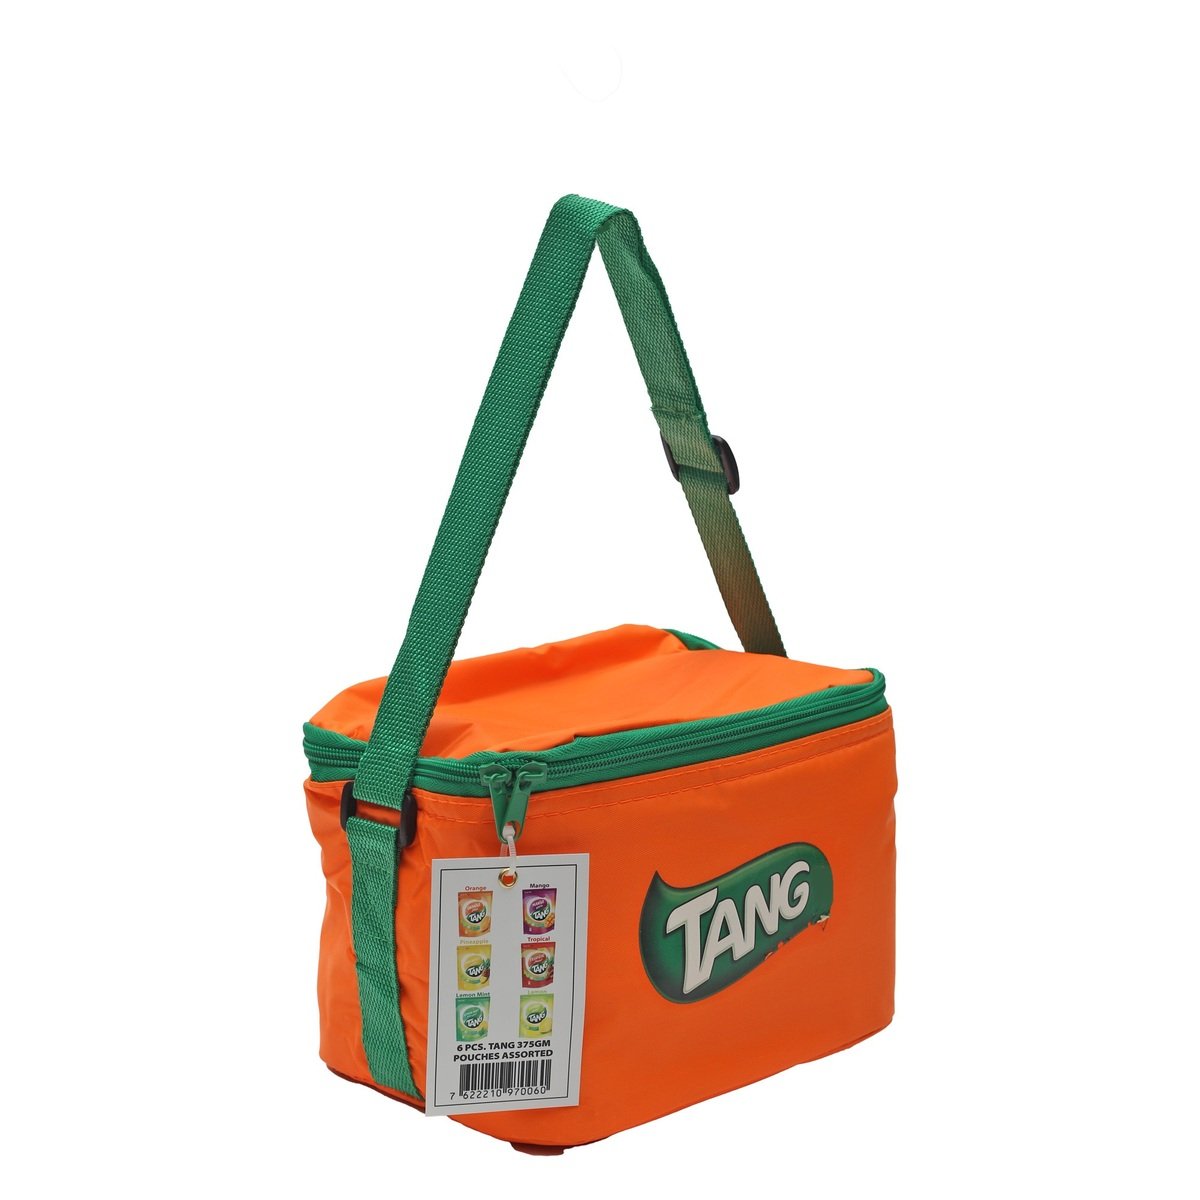 Tang Pouch Assorted 6 x 375 g + Cooler Bag